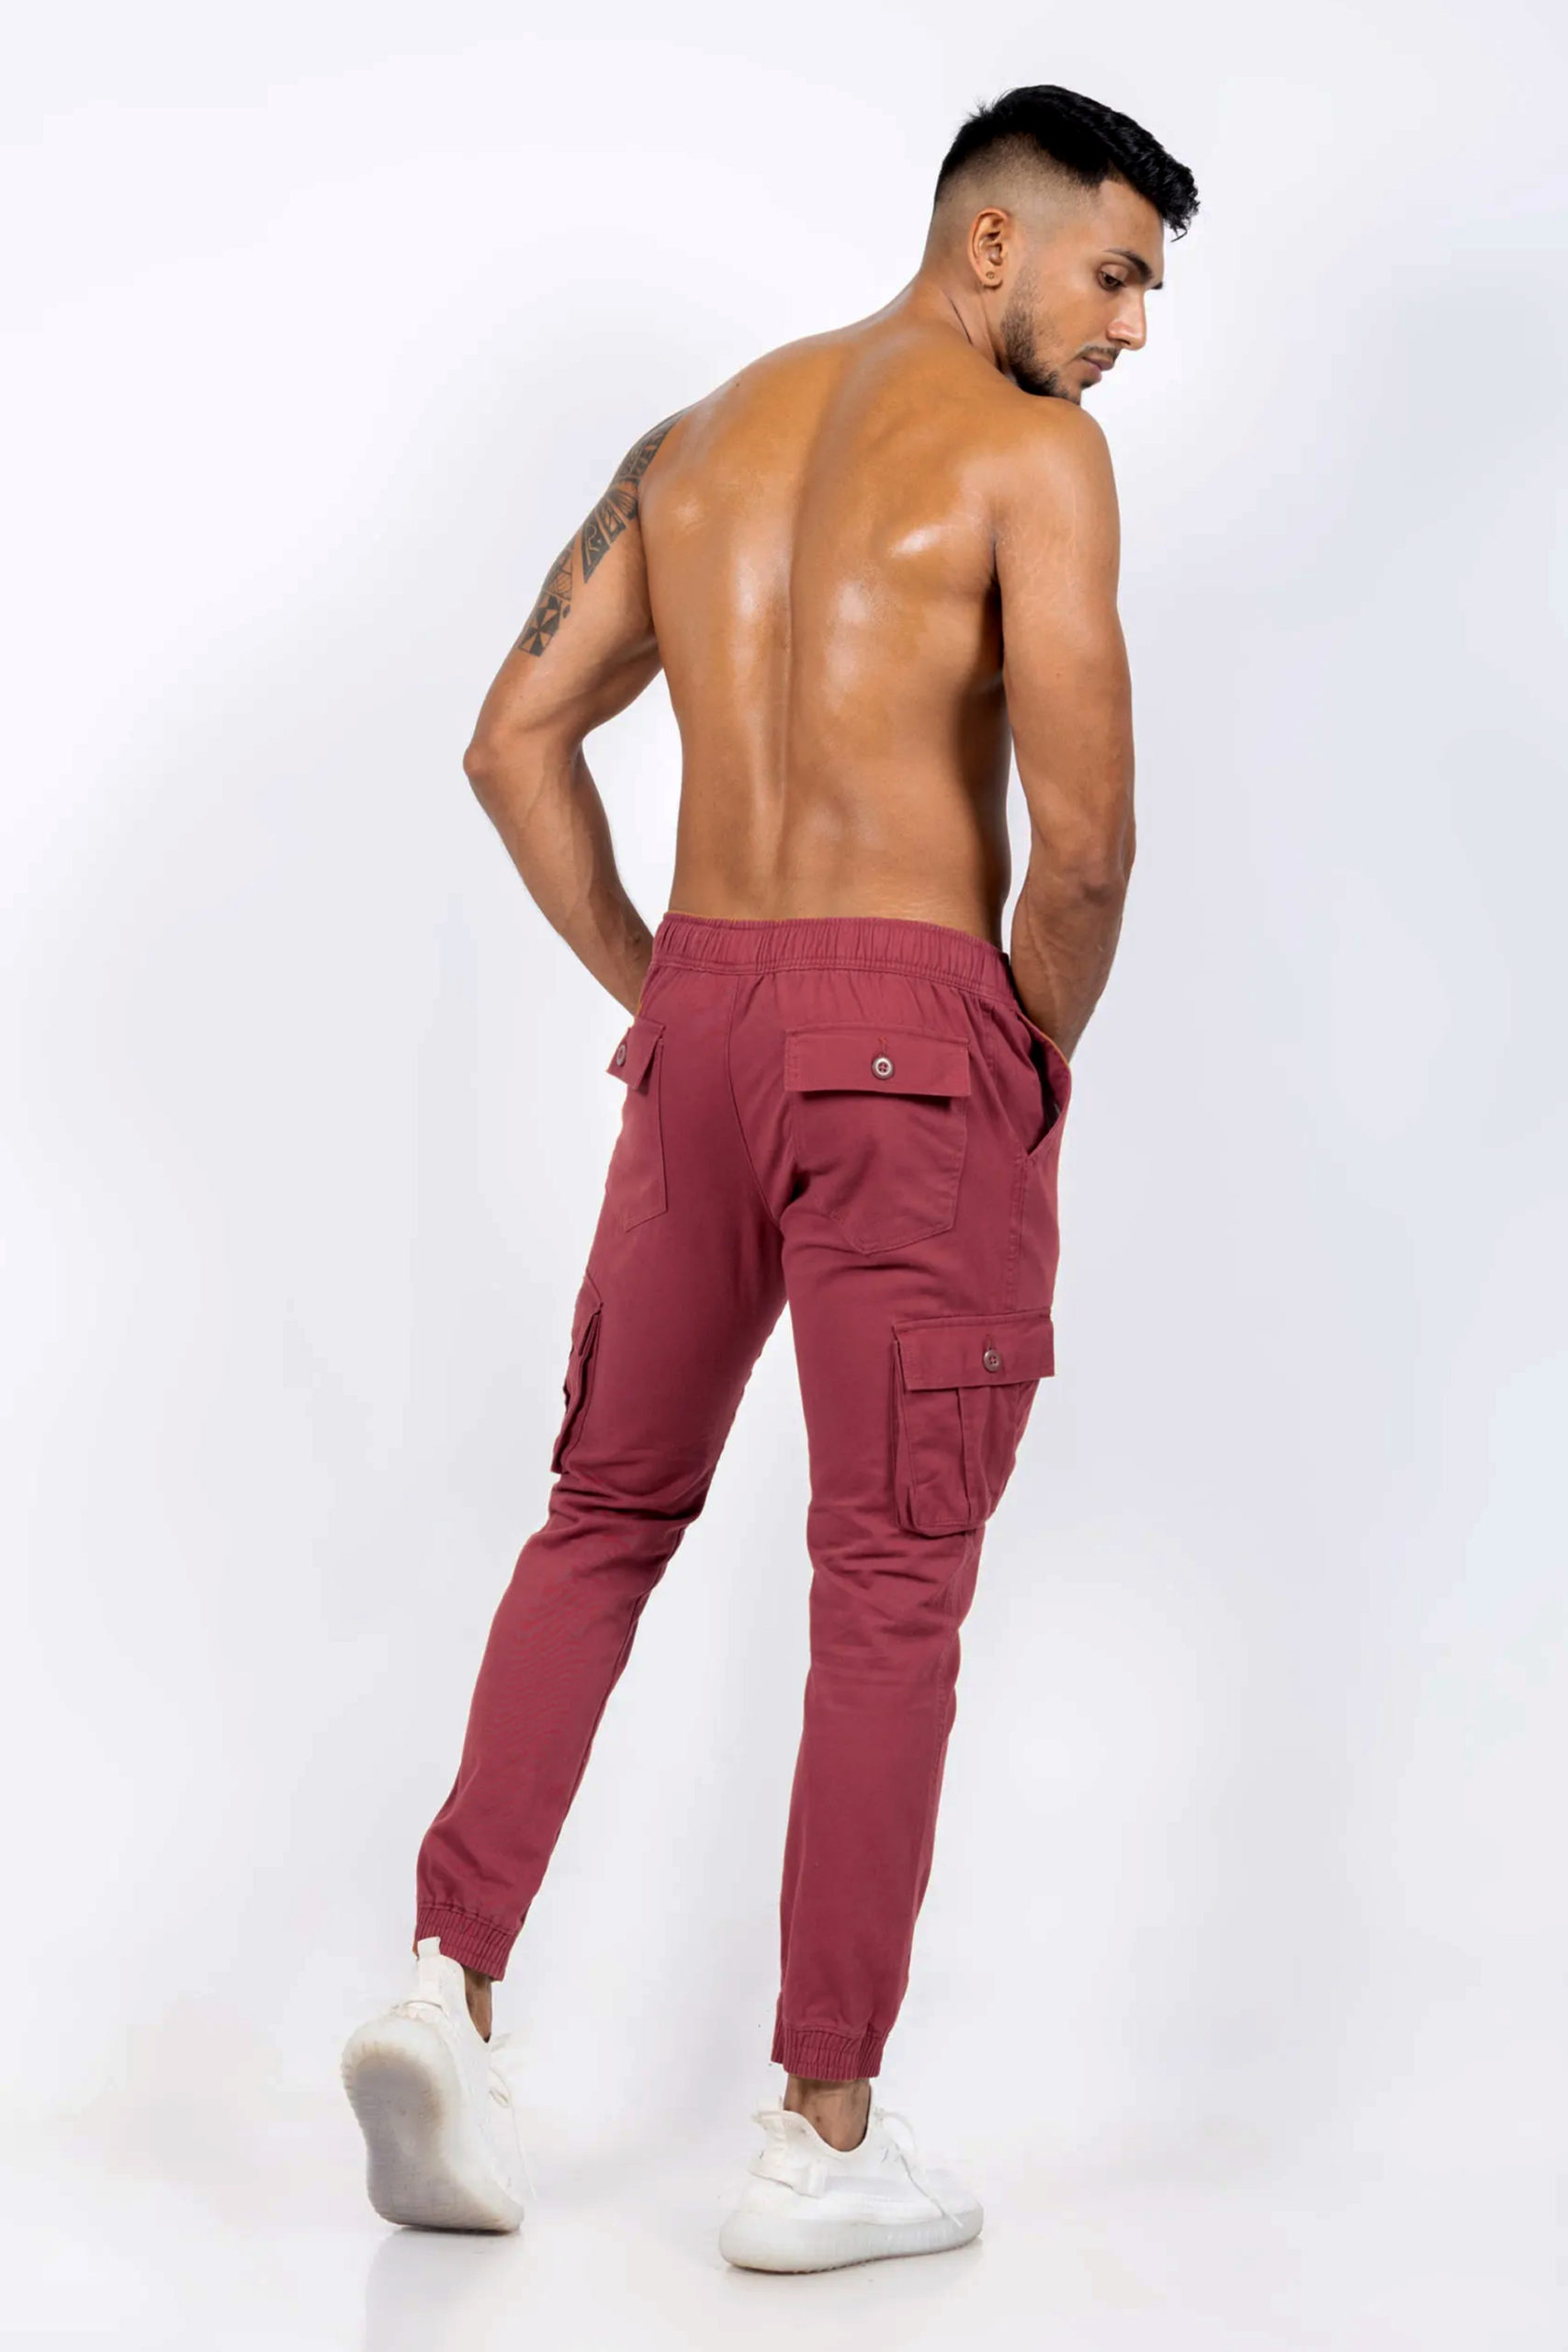 Buy Beige and Maroon Combo of 2 Side Pocket Straight Cargo Pants Cotton for  Best Price, Reviews, Free Shipping